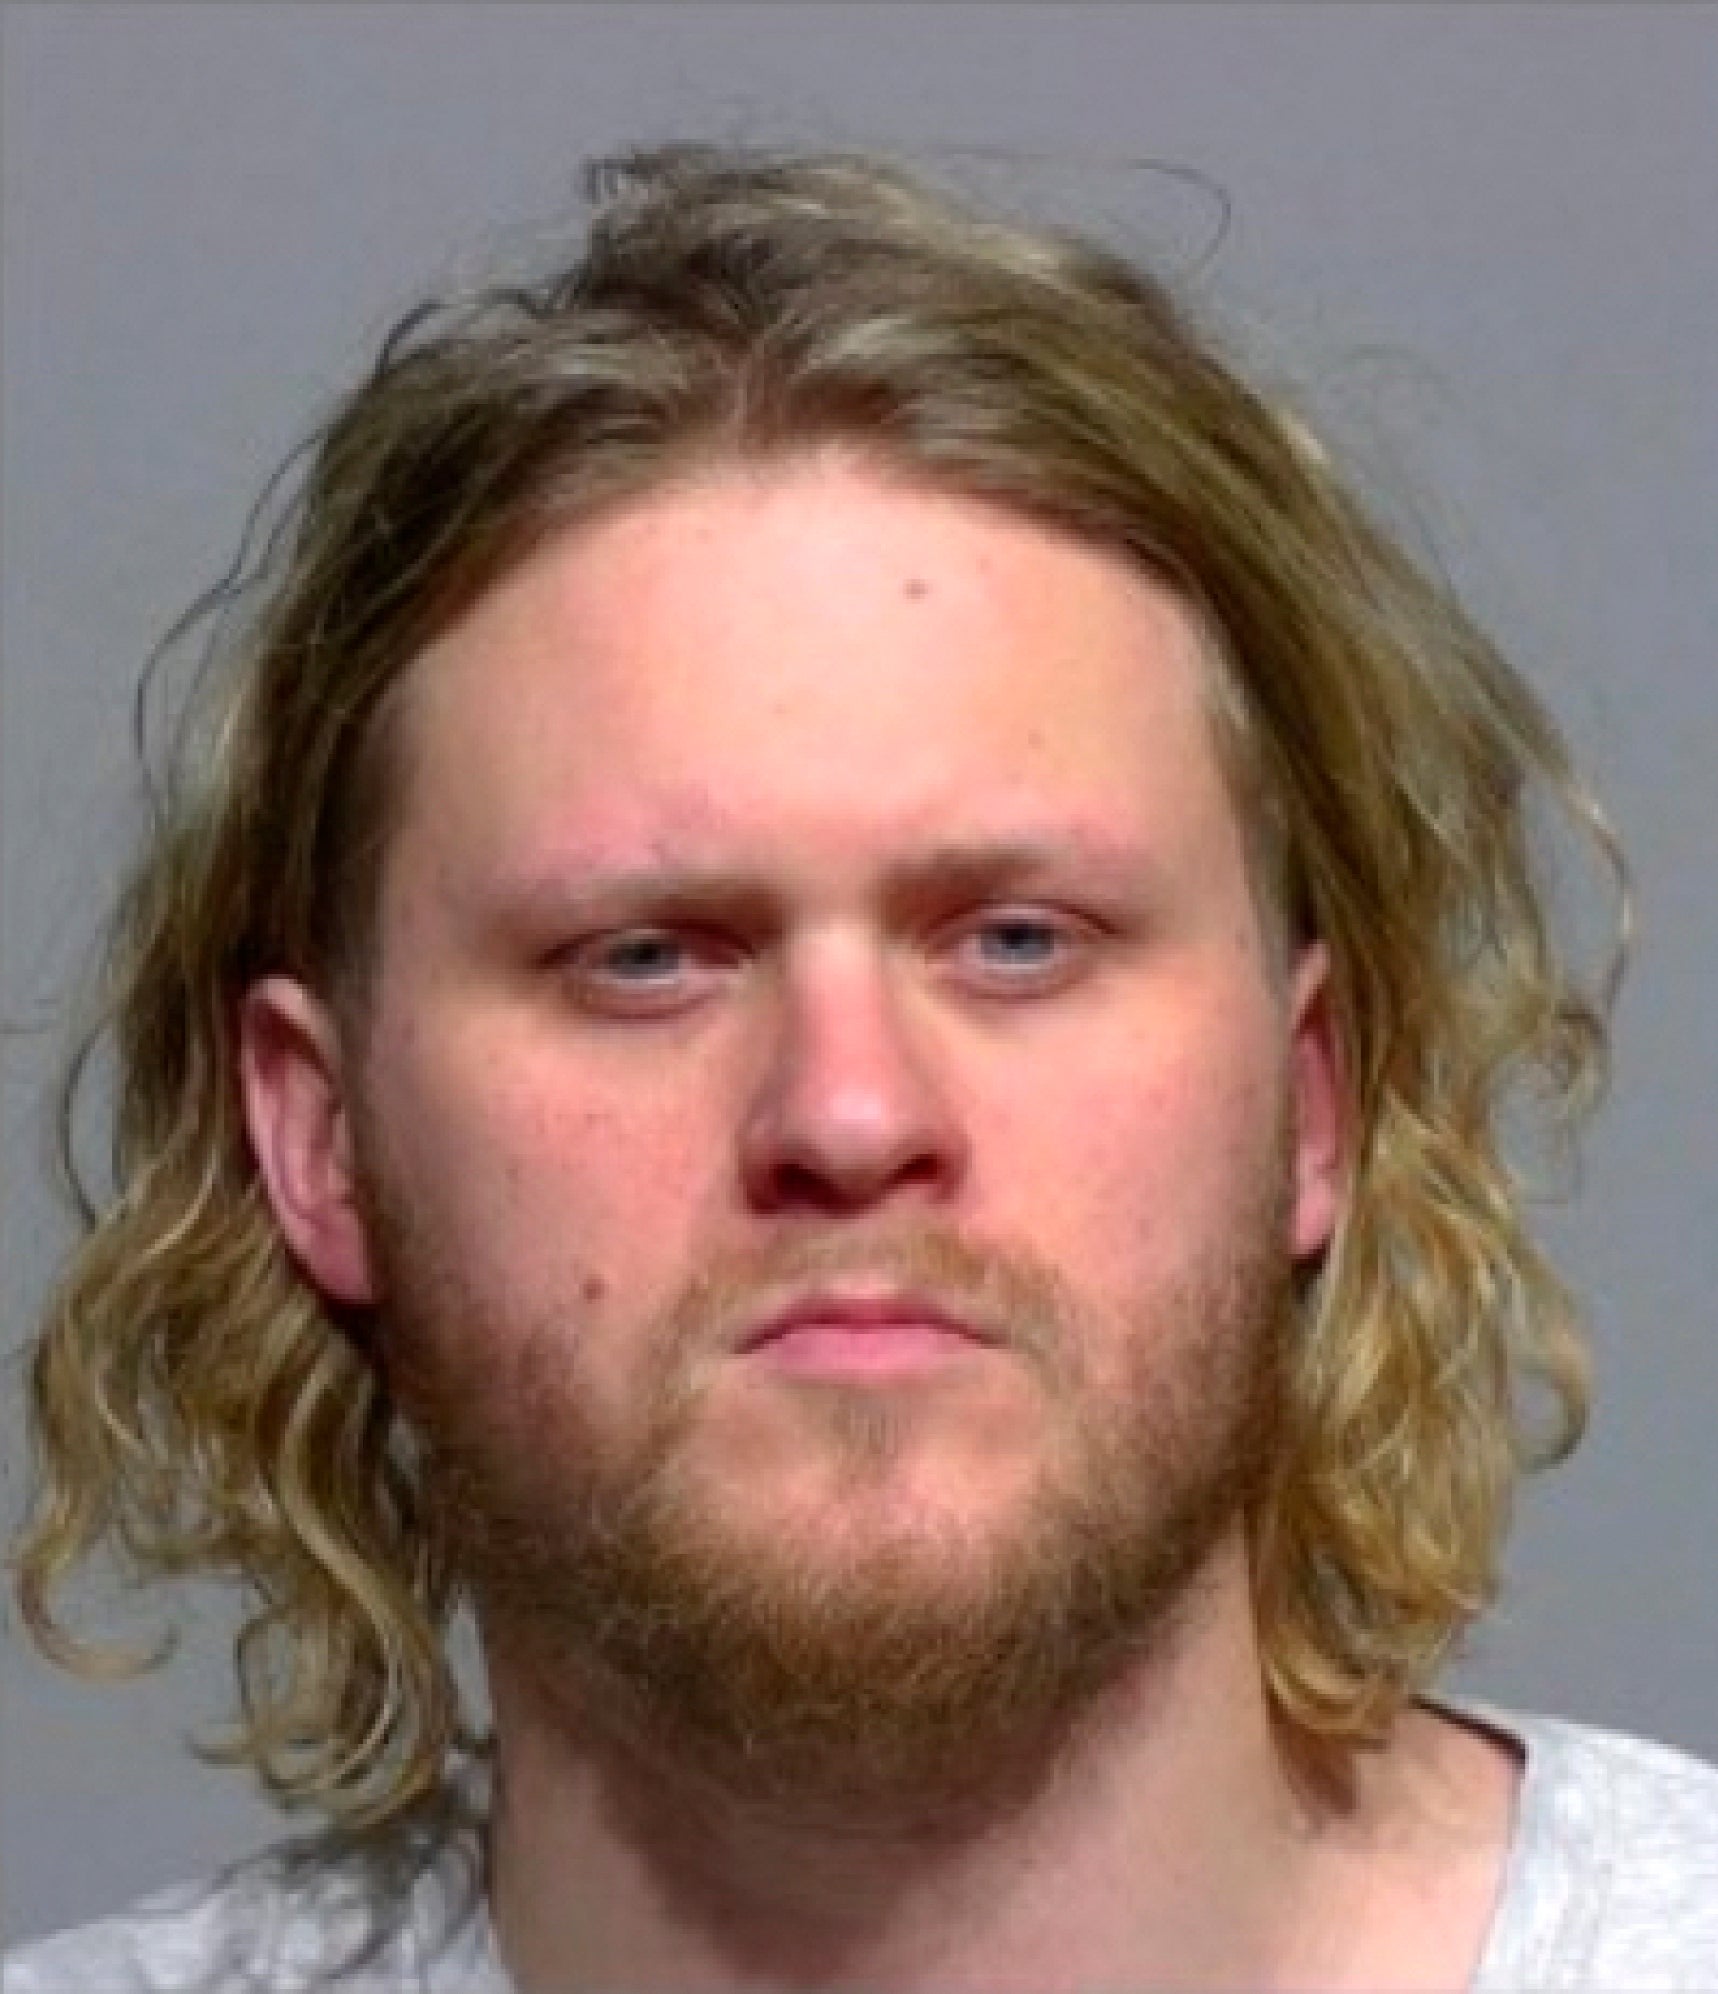 Surveillance footage from the Twisted Fisherman restaurant in Milwaukee showed Robinson having drinks at the bar Maxwell Anderson, 33, (pictured) on April 1. He has been charged with first-degree intentional homicide, mutilating a corpse and arson